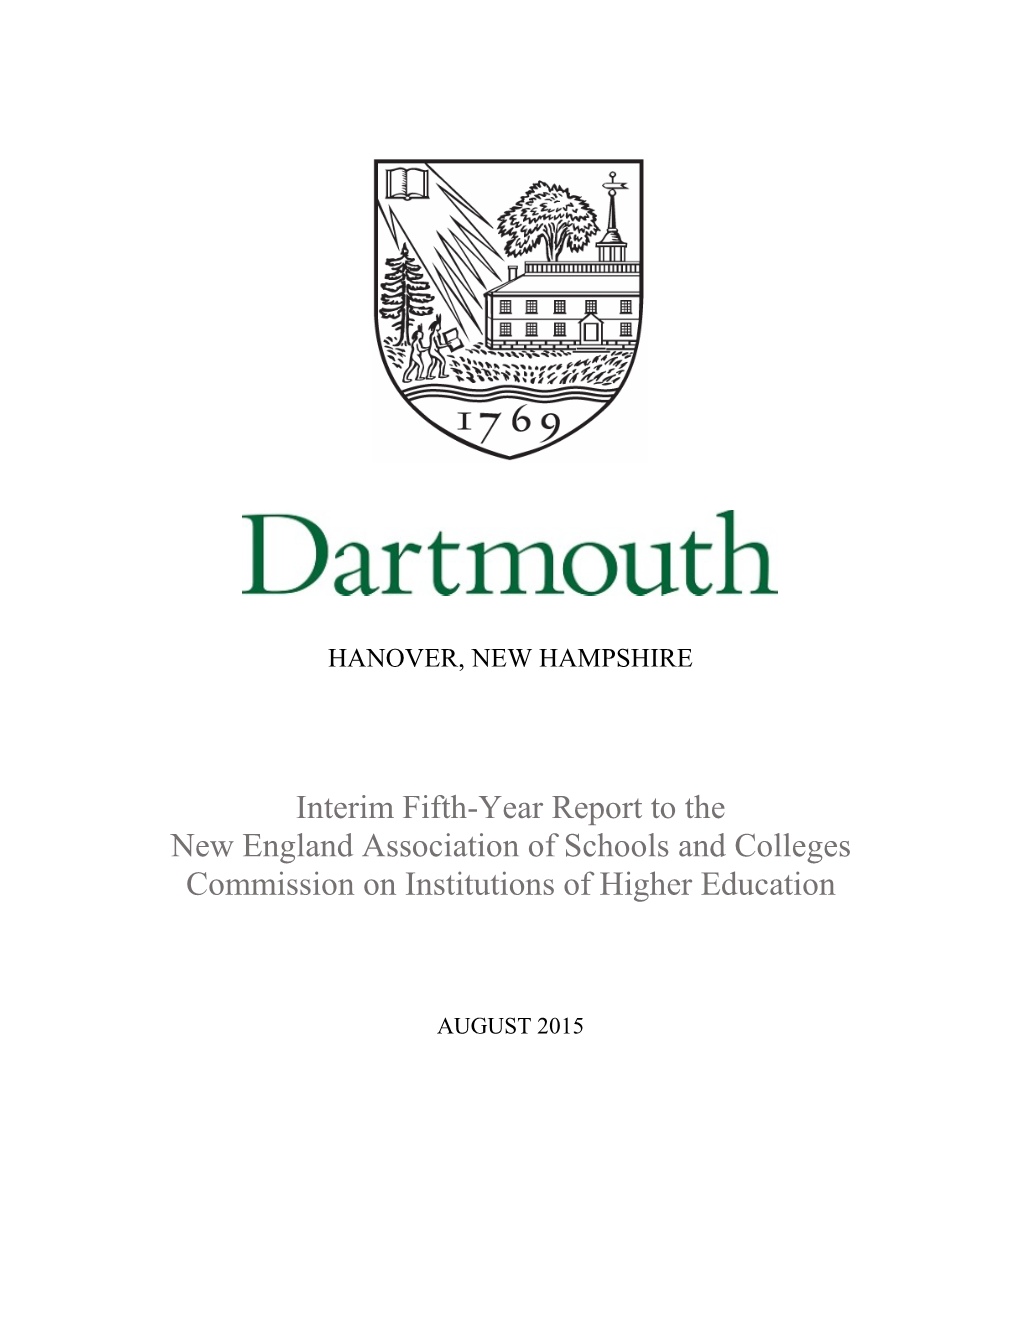 Interim Fifth-Year Report to the New England Association of Schools and Colleges Commission on Institutions of Higher Education